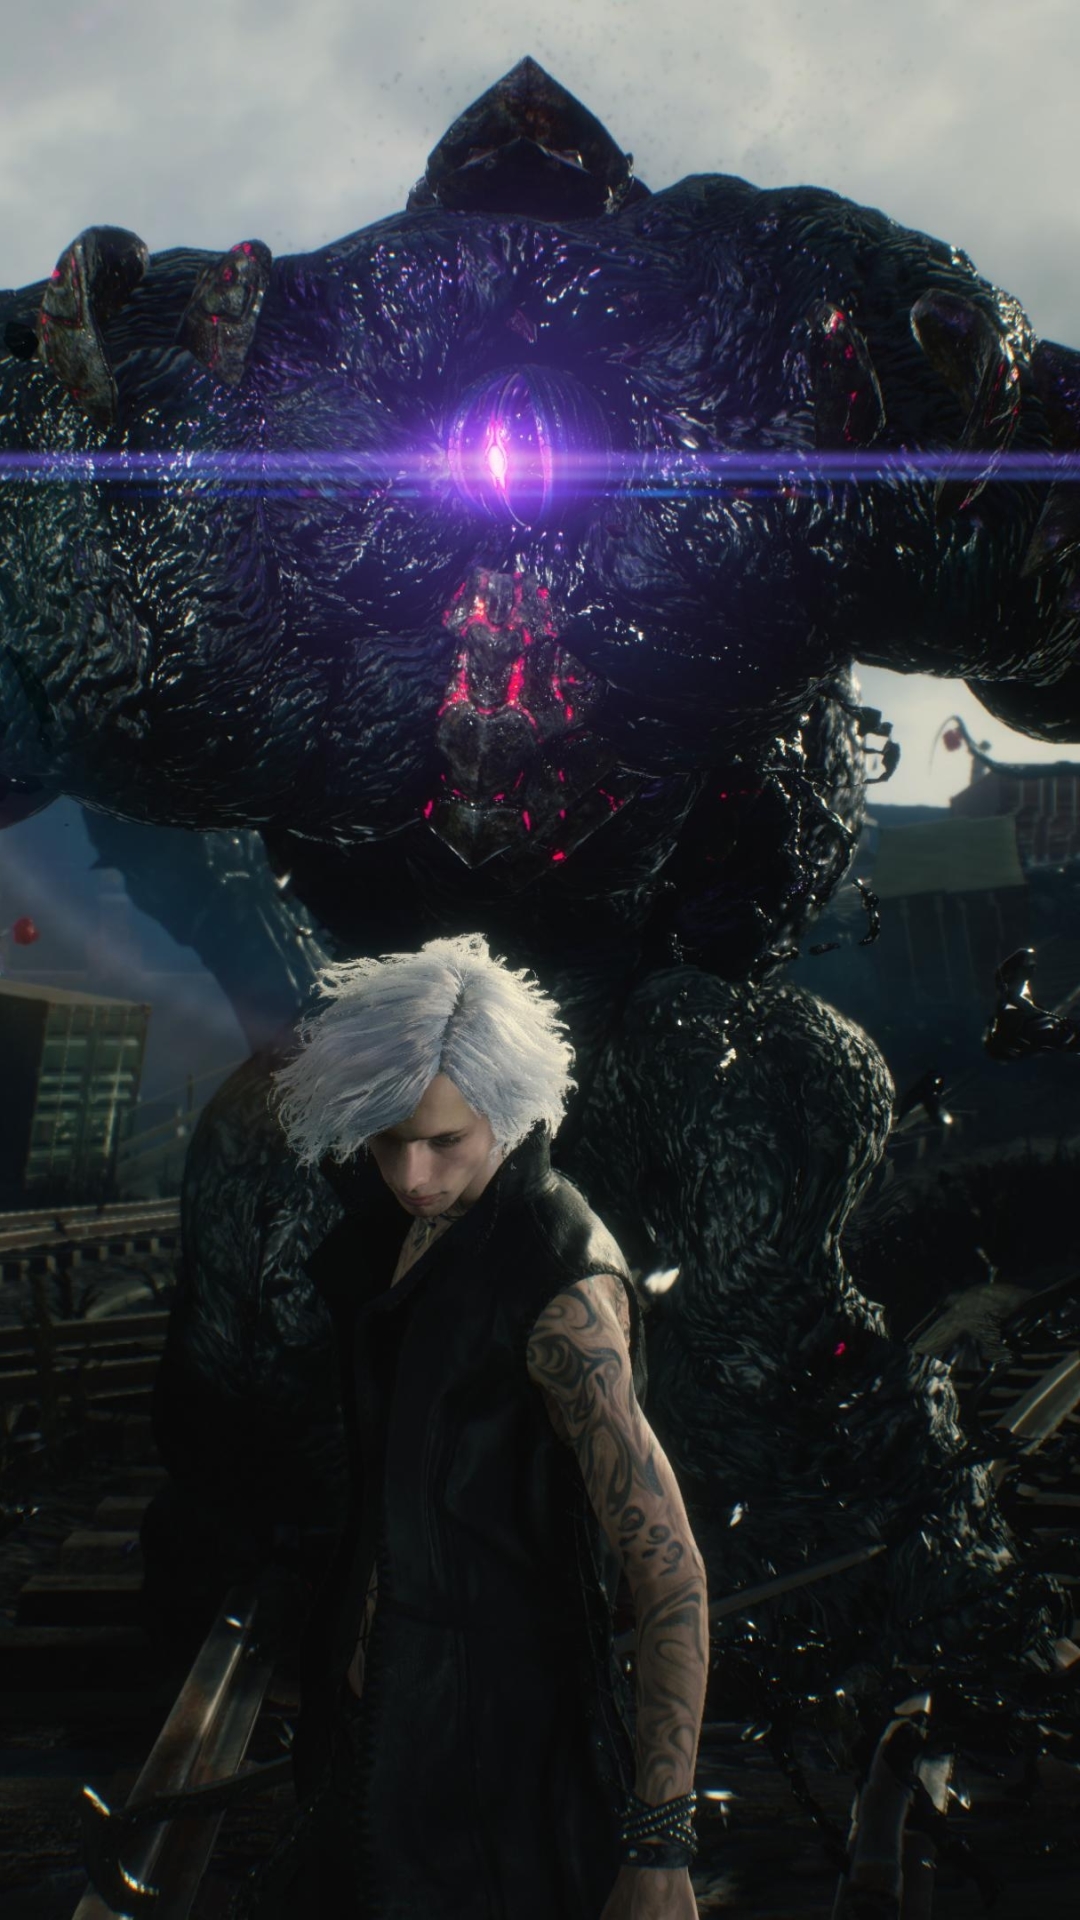 Handy-Wallpaper Devil May Cry, Computerspiele, V (Devil May Cry), Devil May Cry 5 kostenlos herunterladen.